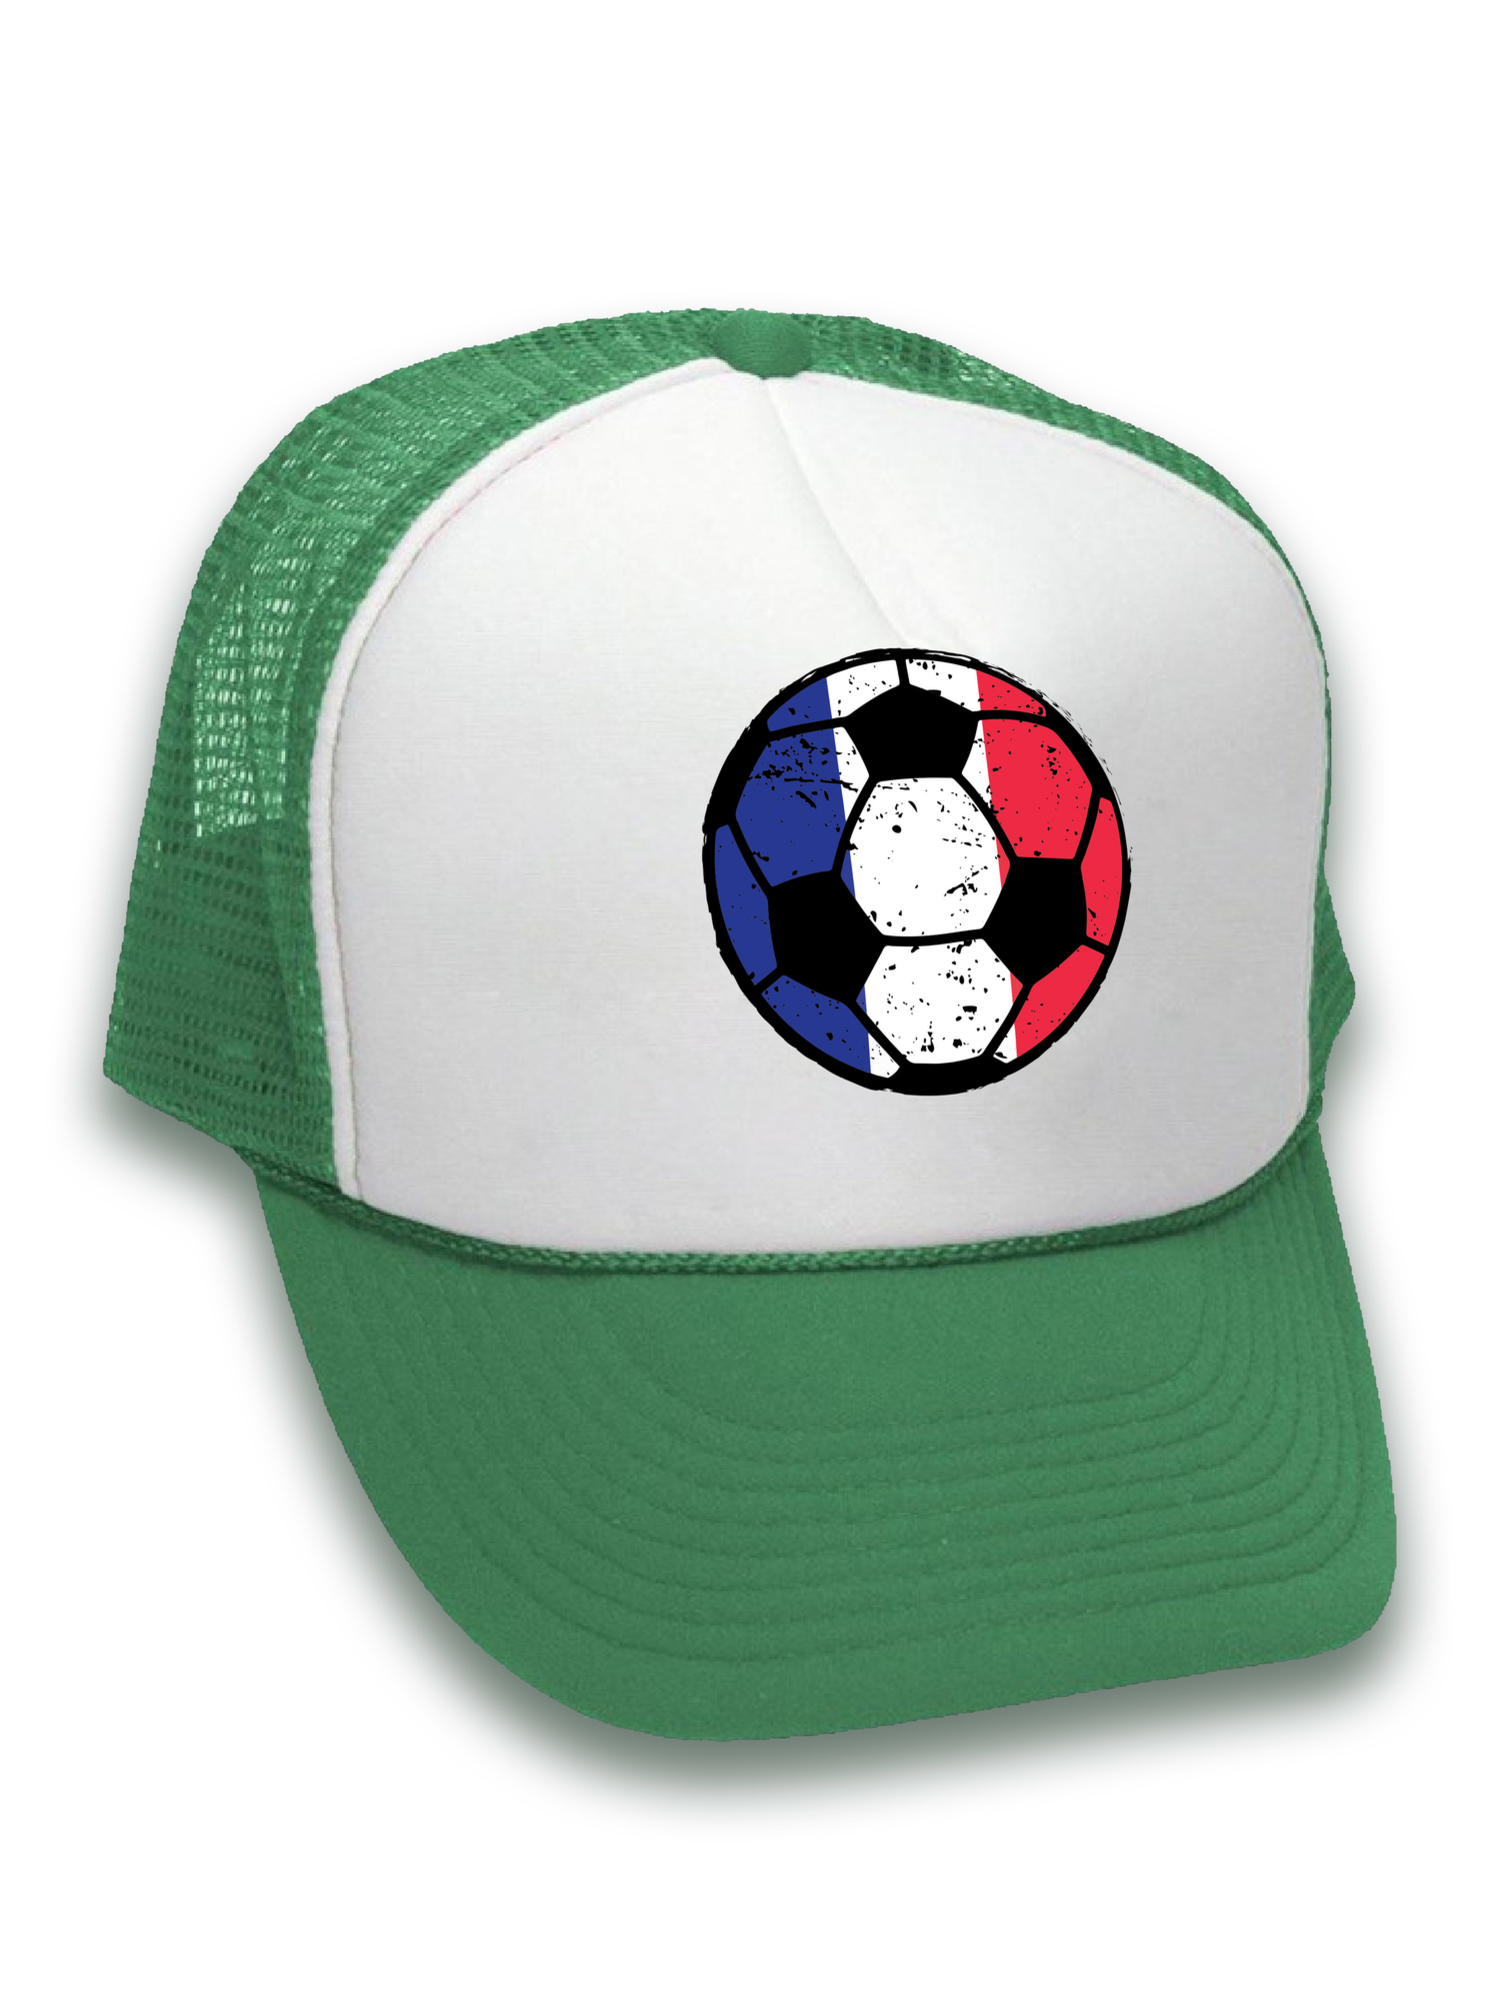 Awkward Styles France Soccer Ball Hat French Soccer Trucker Hat France 2018 Baseball Cap France Trucker Hats for Men and Women Hat Gifts from France French Baseball Hats French Flag Trucker Hat - image 2 of 6